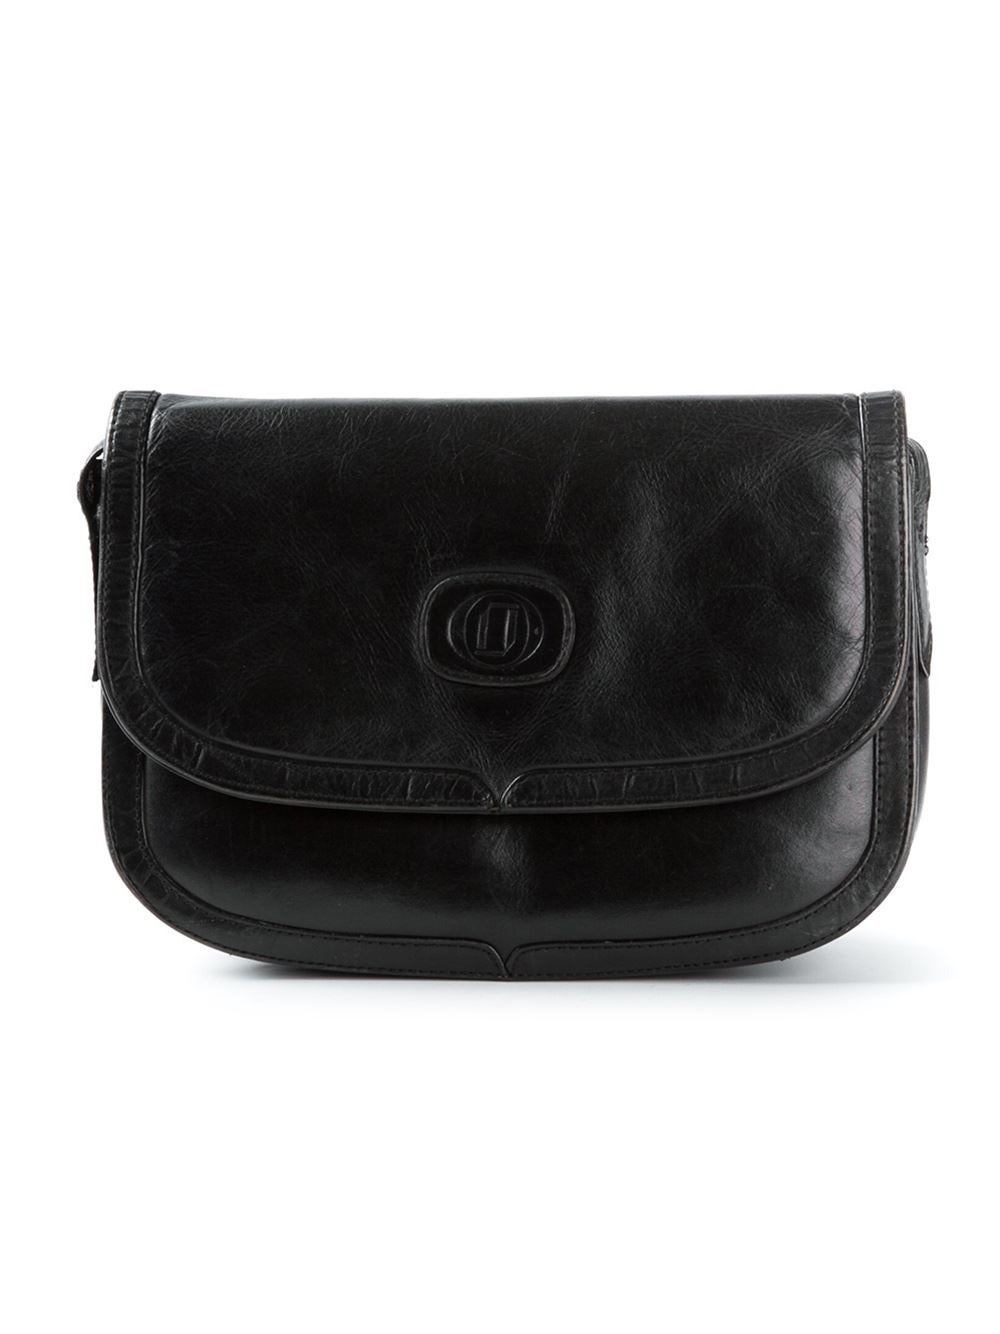 1990S Cartier black leather cross body bag featuring a front flap closure, a front logo patch, a long shoulder strap, a magnetic fastening, multiple interior compartments and an internal zipped pocket.
The long strap measures: 122cm x 2cm.